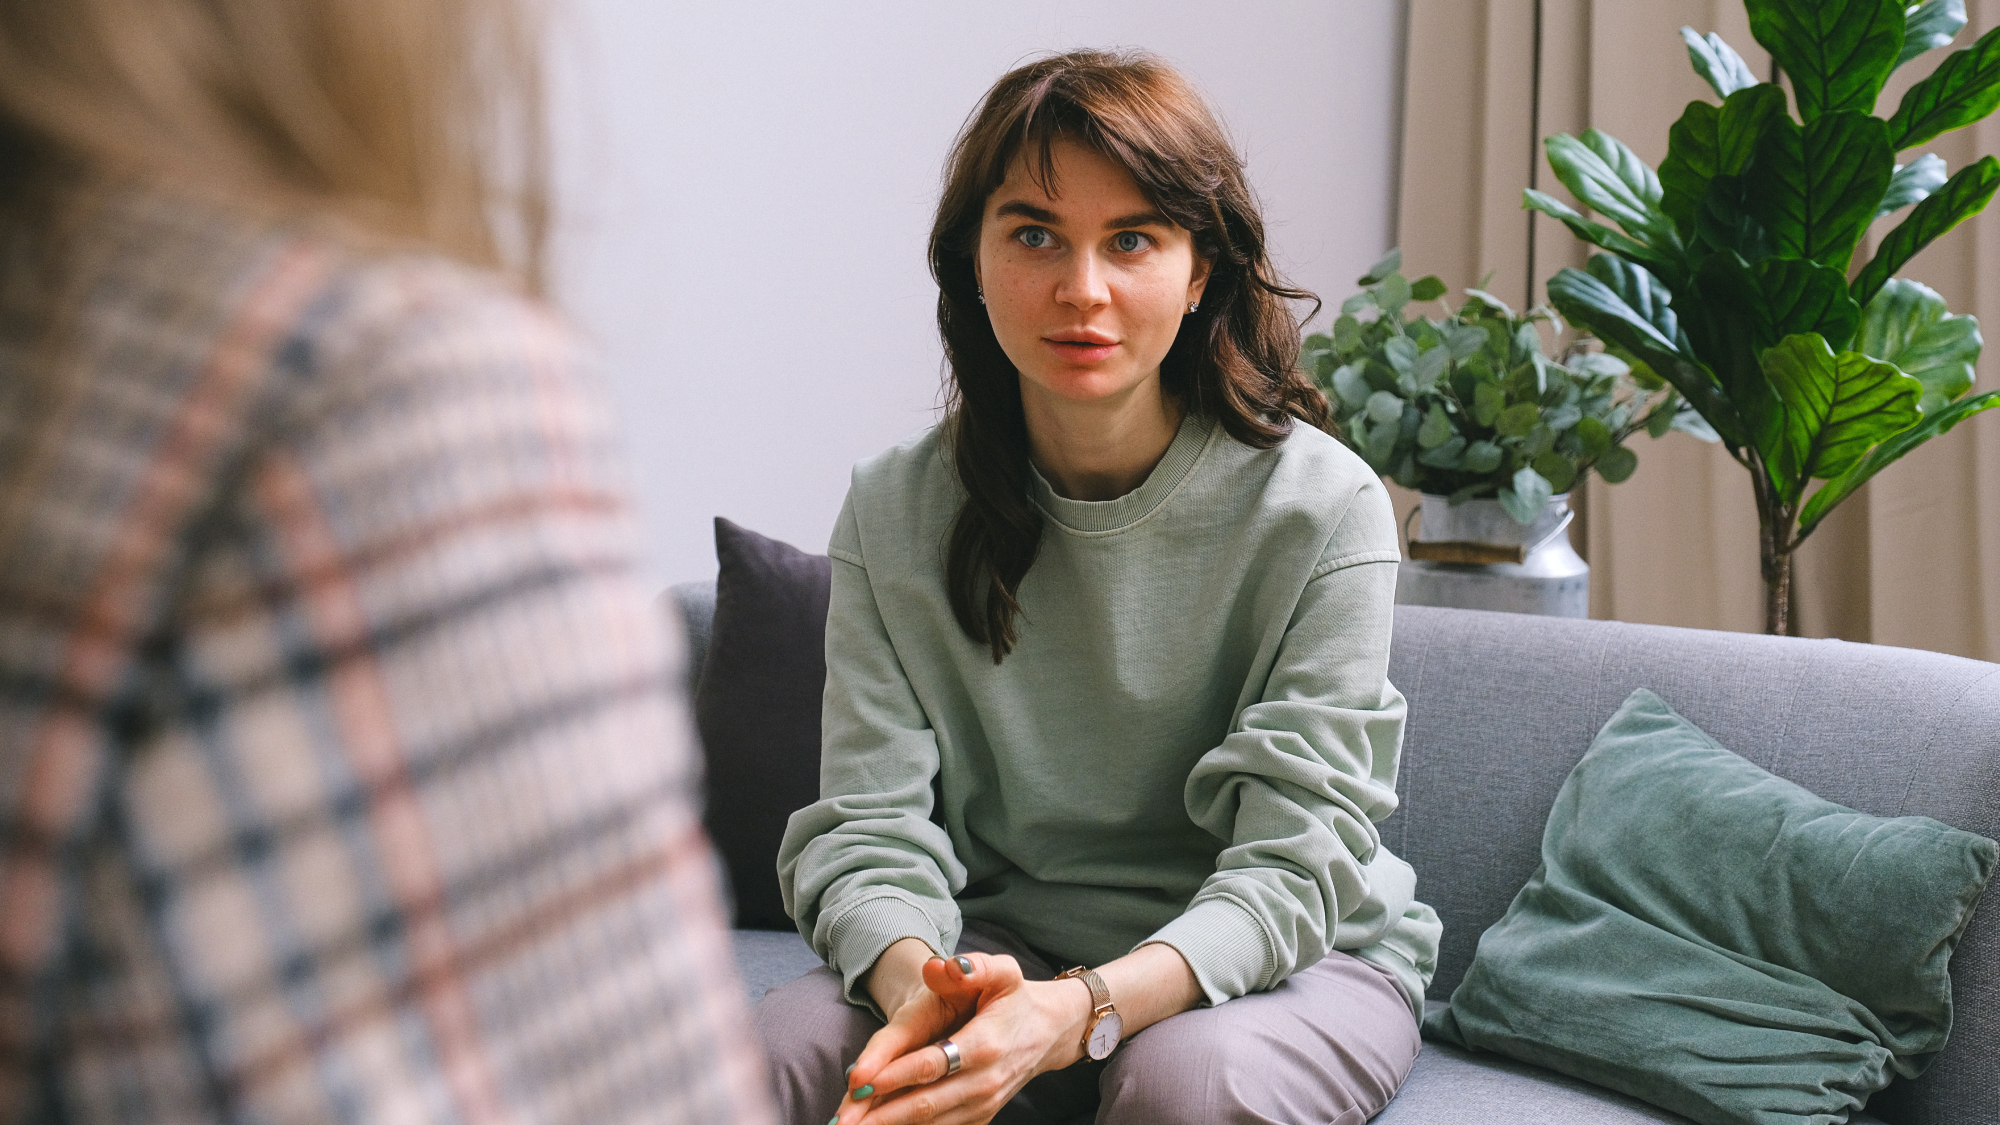 A concerned-looking person sitting on a couch with the back of another person in the foreground, perhaps a therapist talking with someone who has high rejection sensitivity.